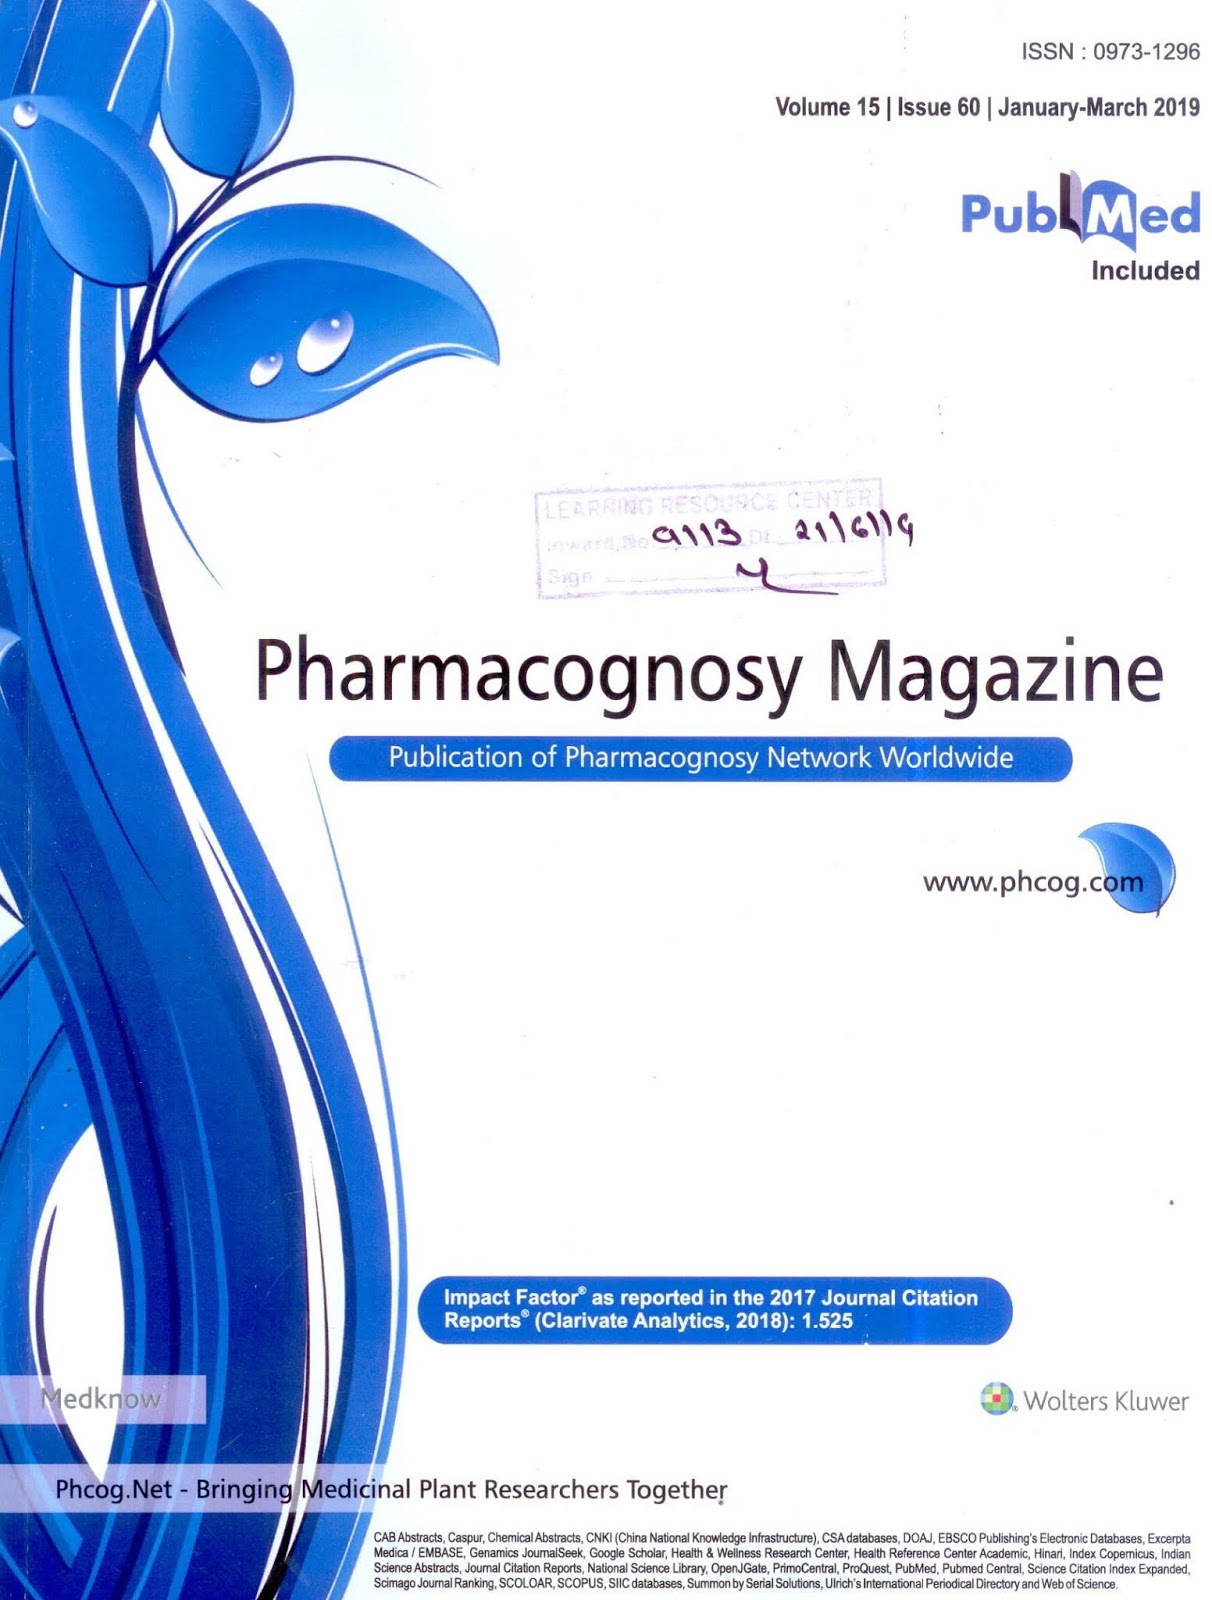 http://www.phcog.com/showBackIssue.asp?issn=0973-1296;year=2019;volume=15;issue=60;month=January-March